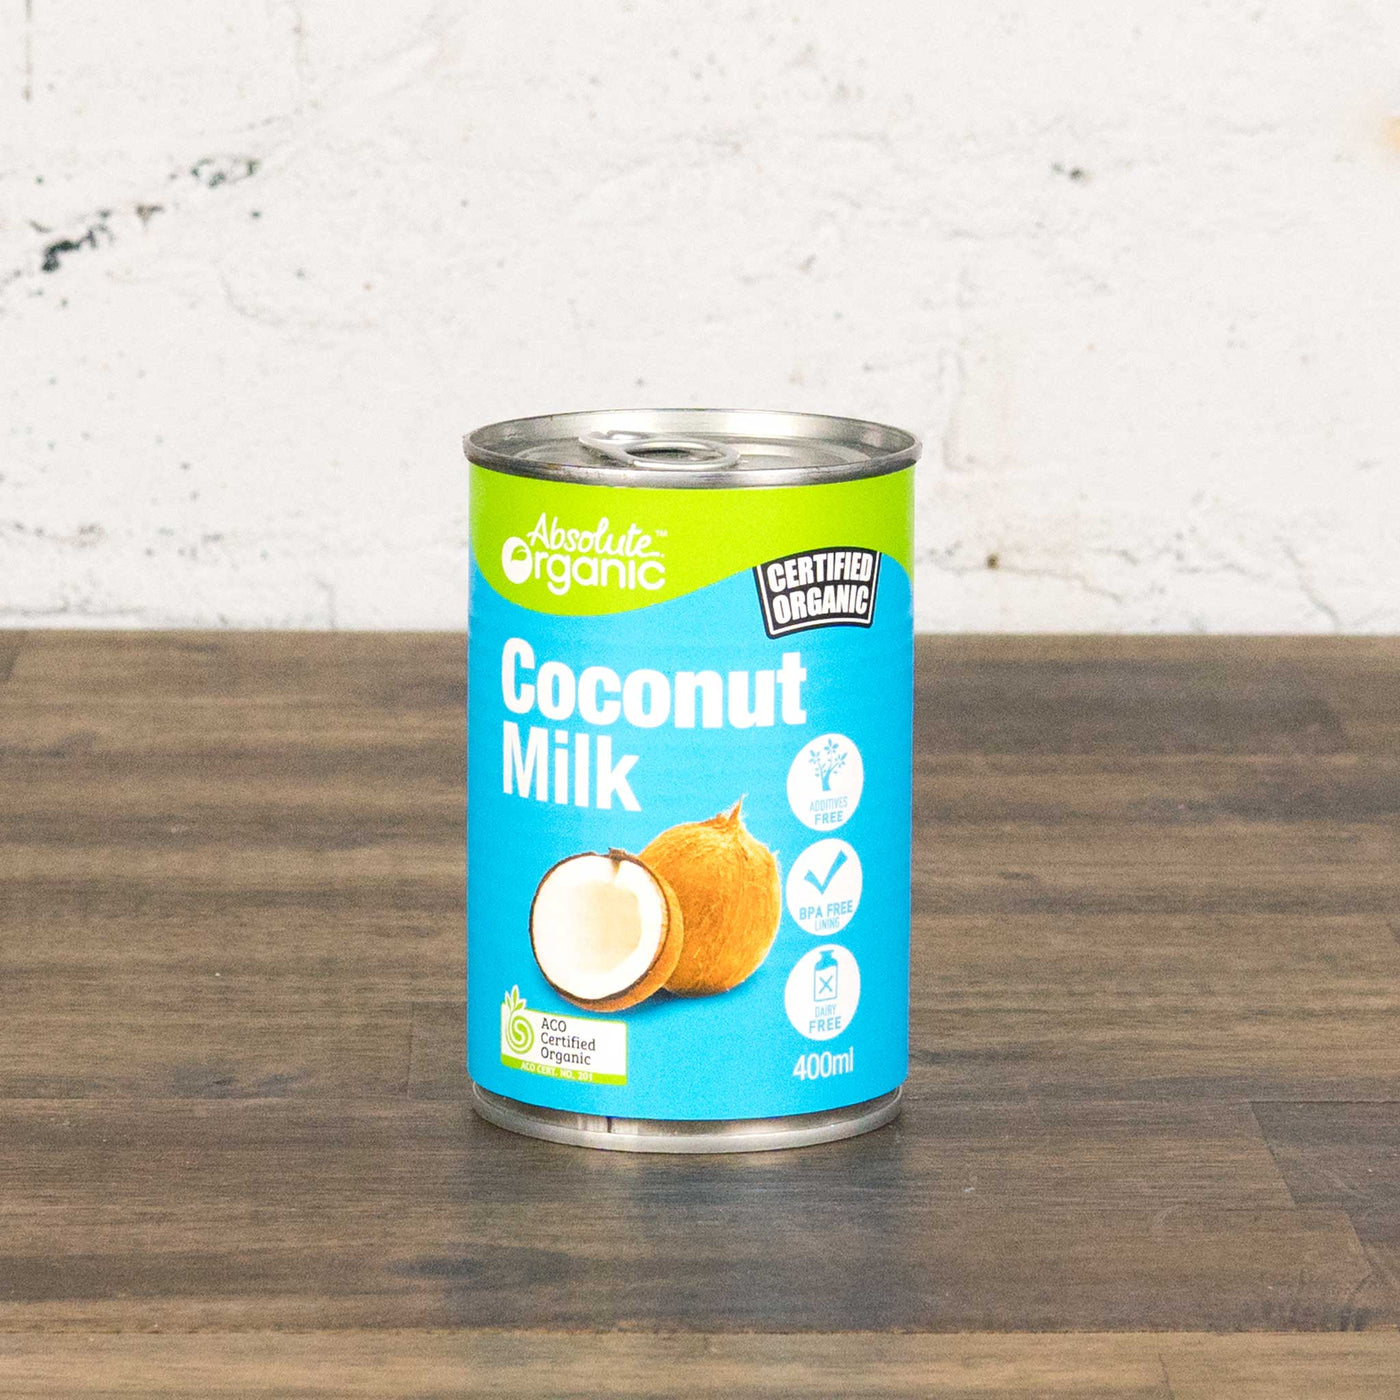 Absolute Organics Coconut Milk Canned